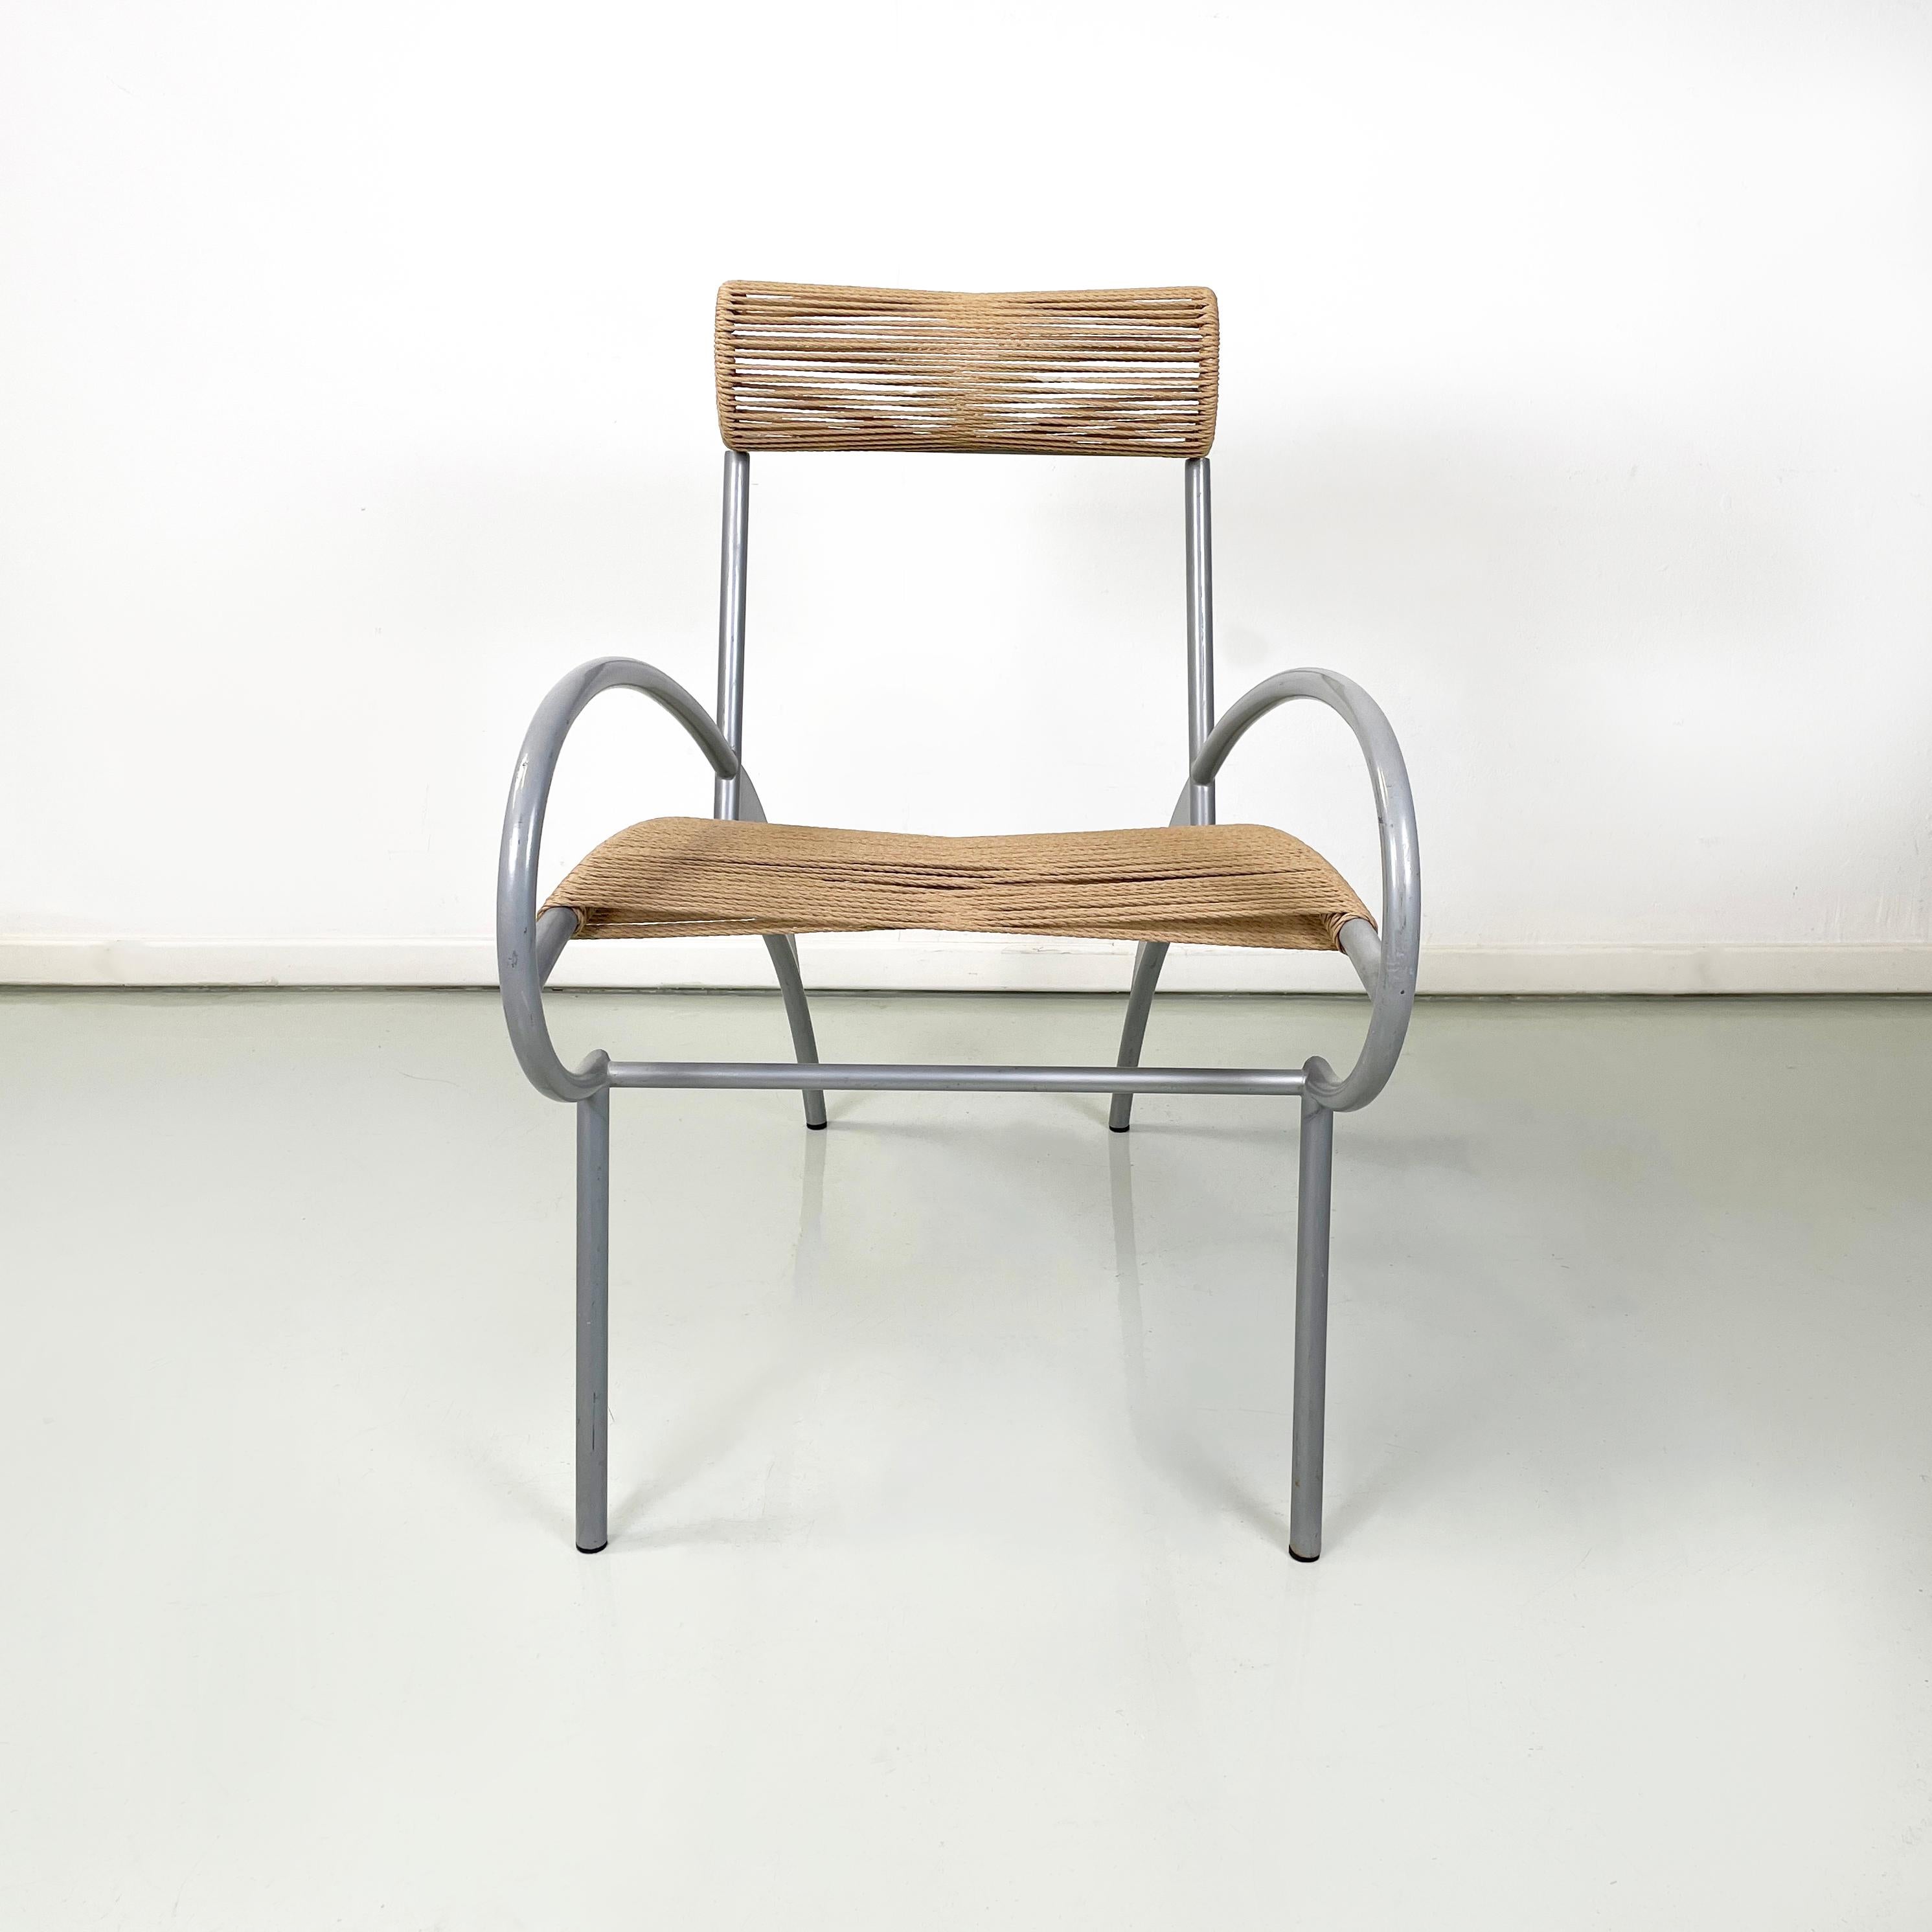 Italian modern rope and gray steel Juliette chair by Massimo Iosa-Ghini, 1990s
Juliette mod. chair with curved backrest and seat in rope. The structure is in gray enamelled tubular steel. The hind legs are curved and have a thin plate, also in gray